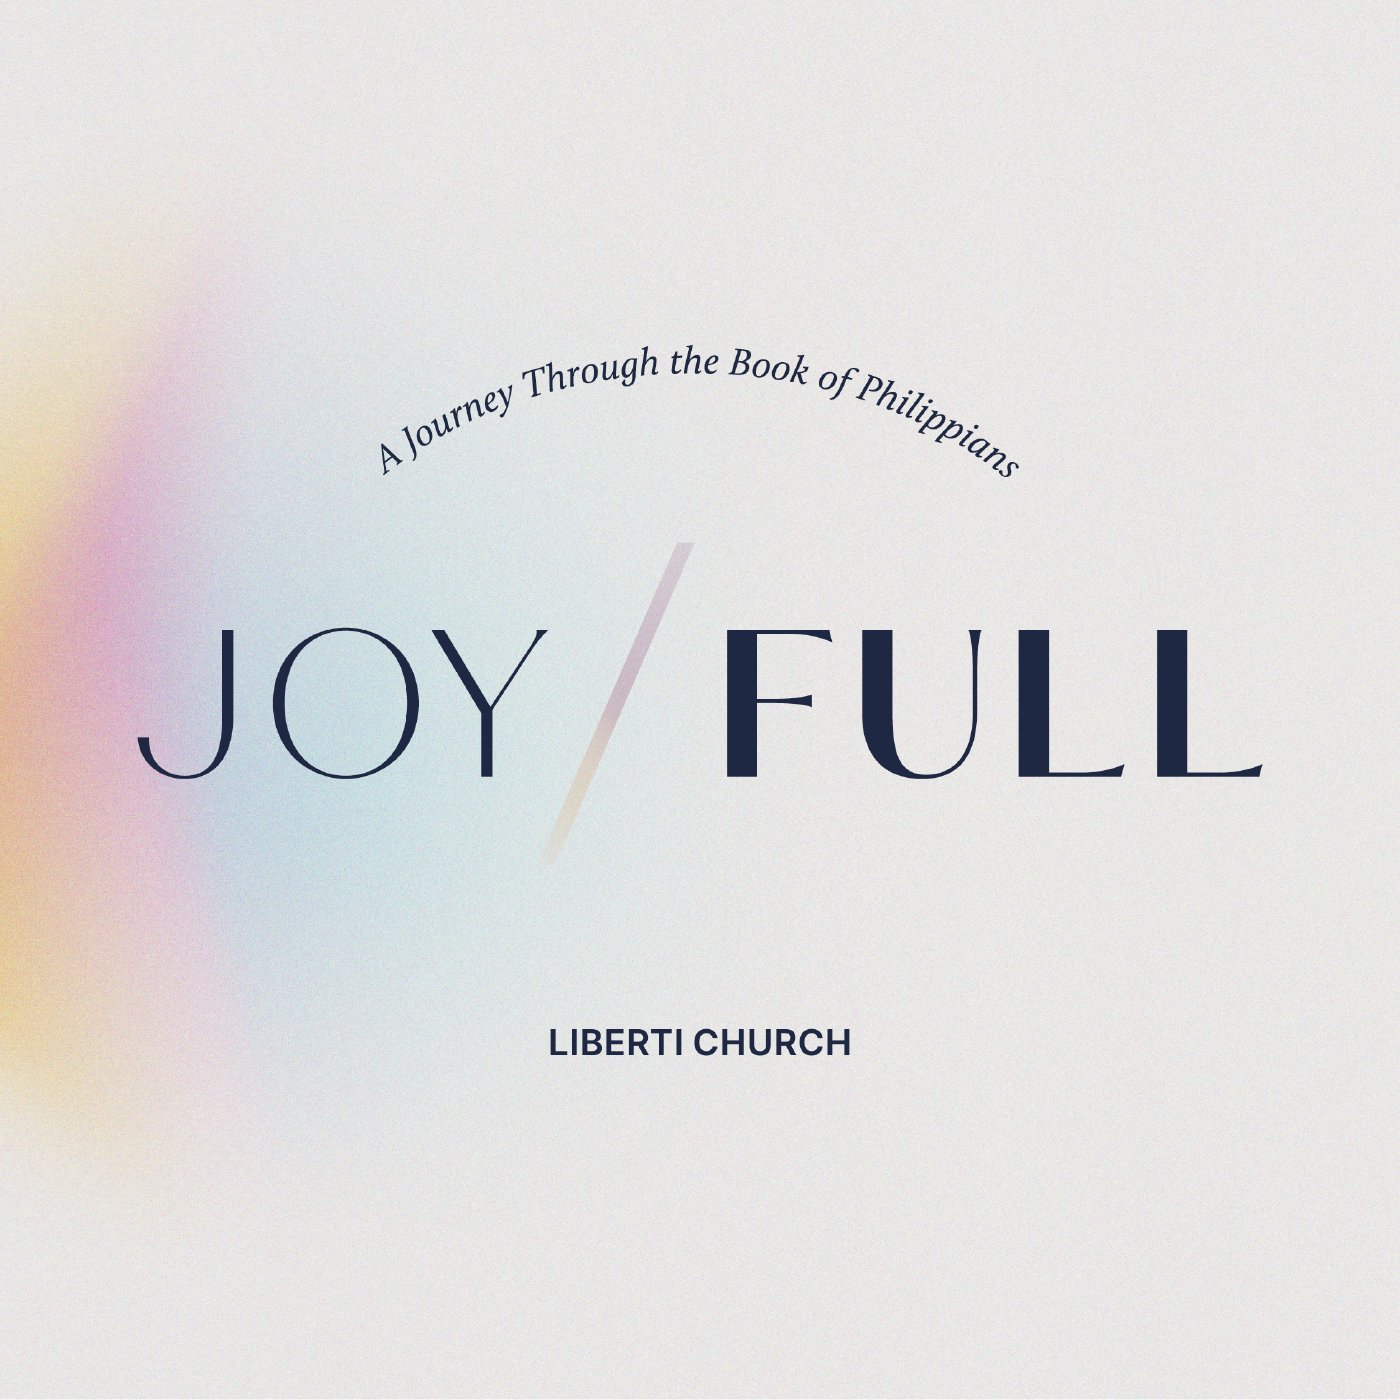 Joy/Full - The Freedom and Beauty of Humility - Week 5